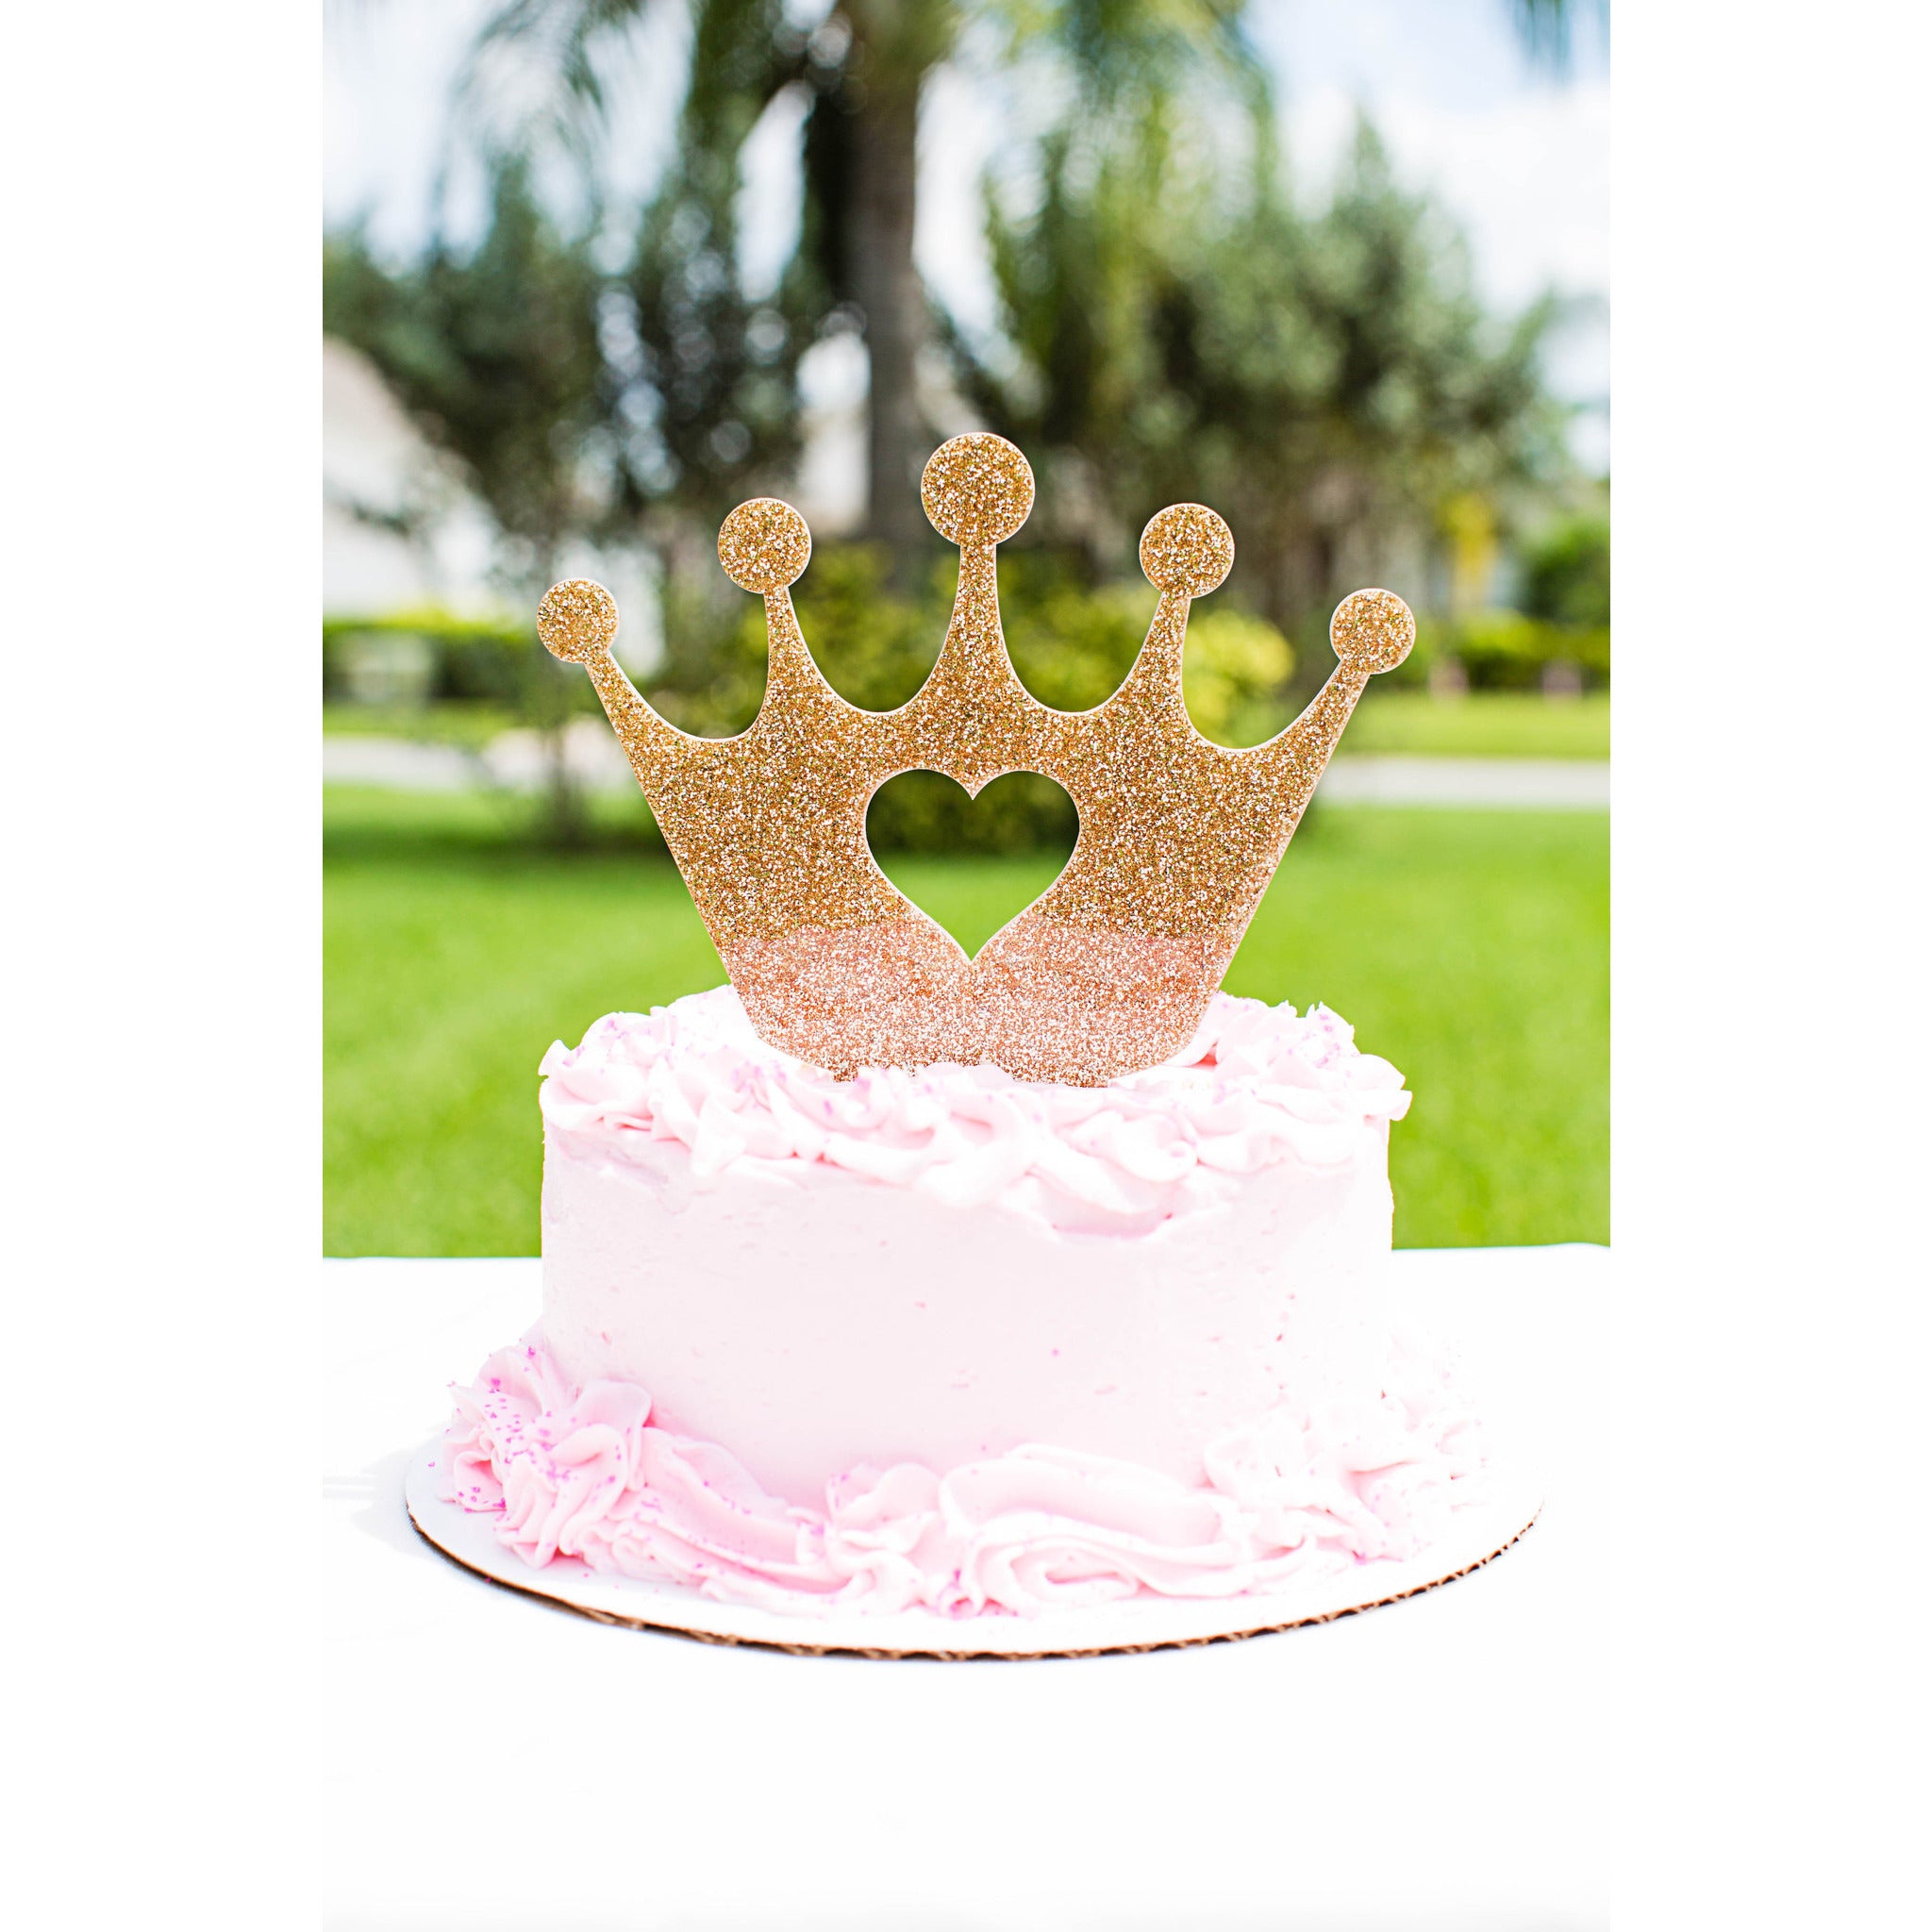 How to Make a Crown Cake Topper (tutorial and free printable template)